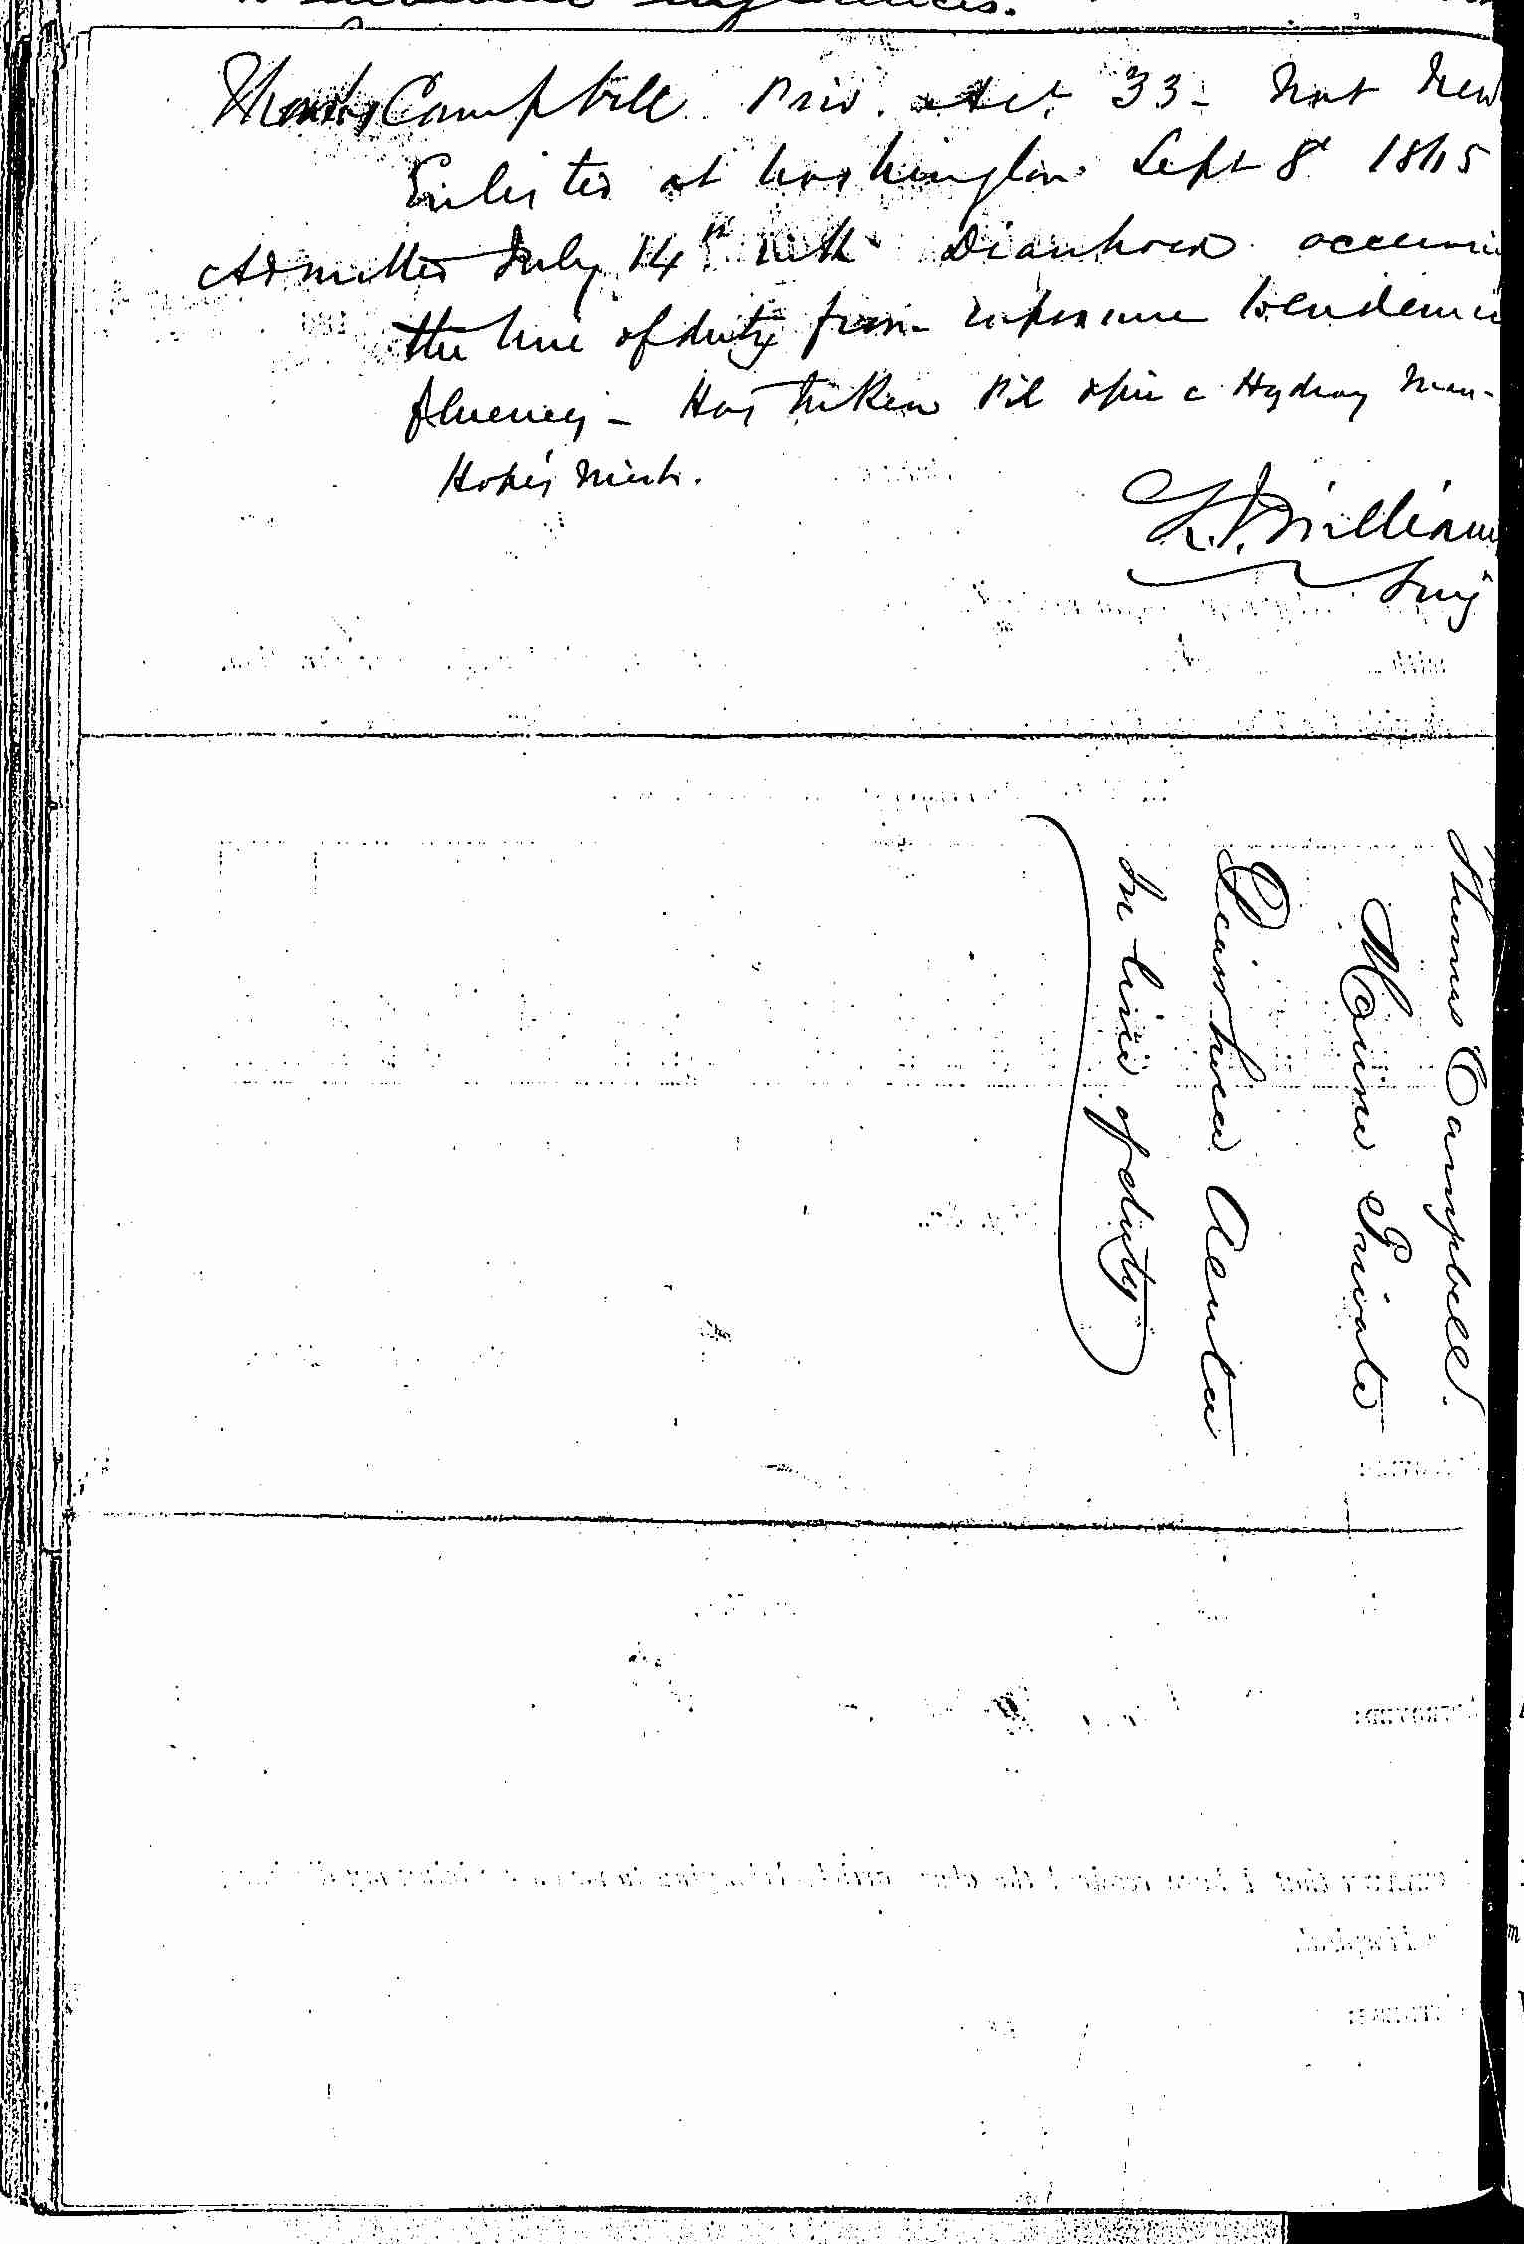 Entry for Thomas Campbell (first admission page 2 of 2) in the log Hospital Tickets and Case Papers - Naval Hospital - Washington, D.C. - 1866-68